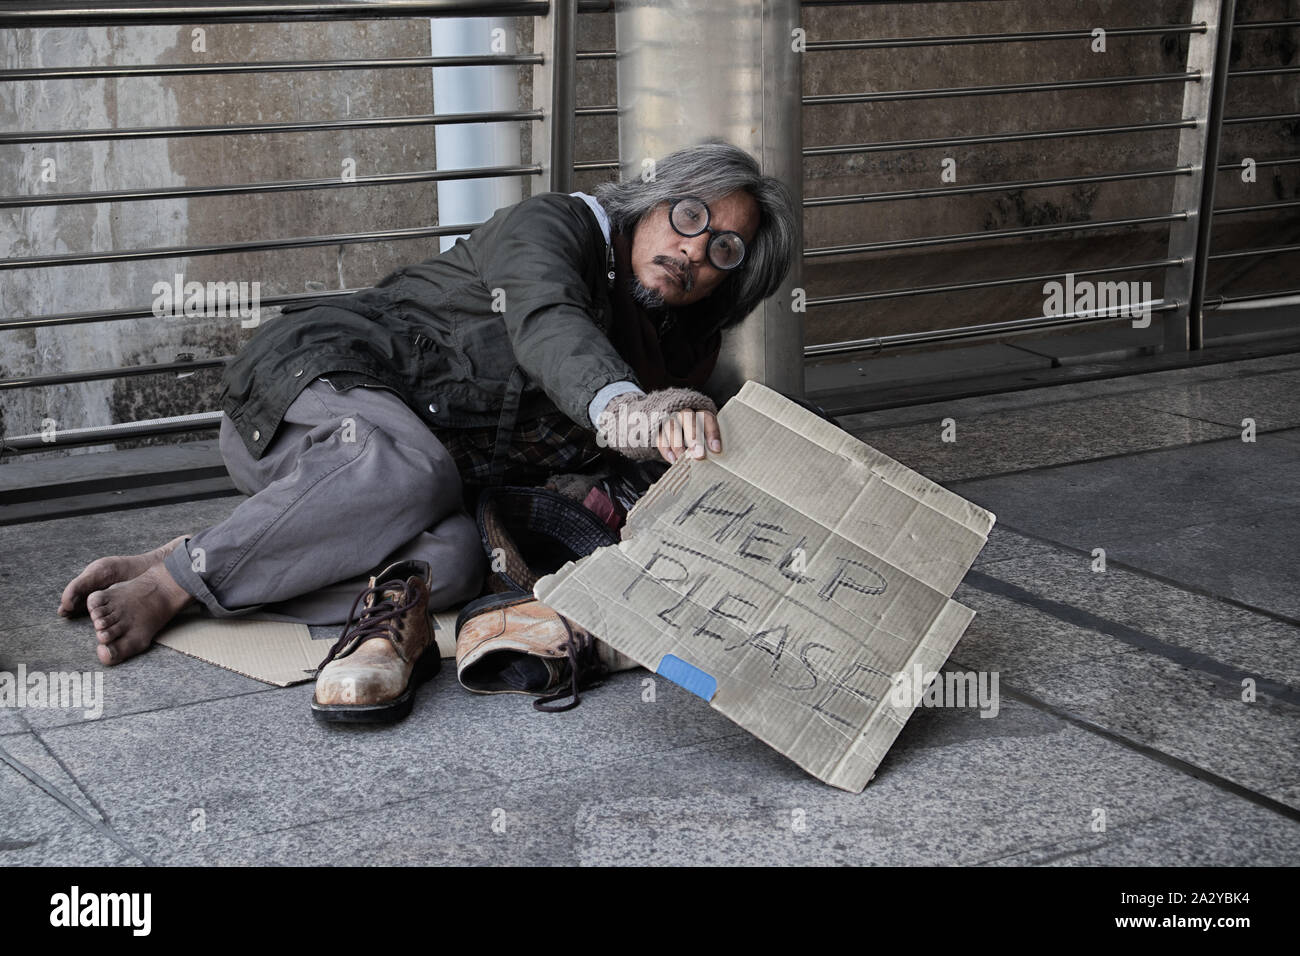 Homeless people living in various cities He waited and needed help from the kind people to give him all the necessary things, clothing, bread, water, Stock Photo